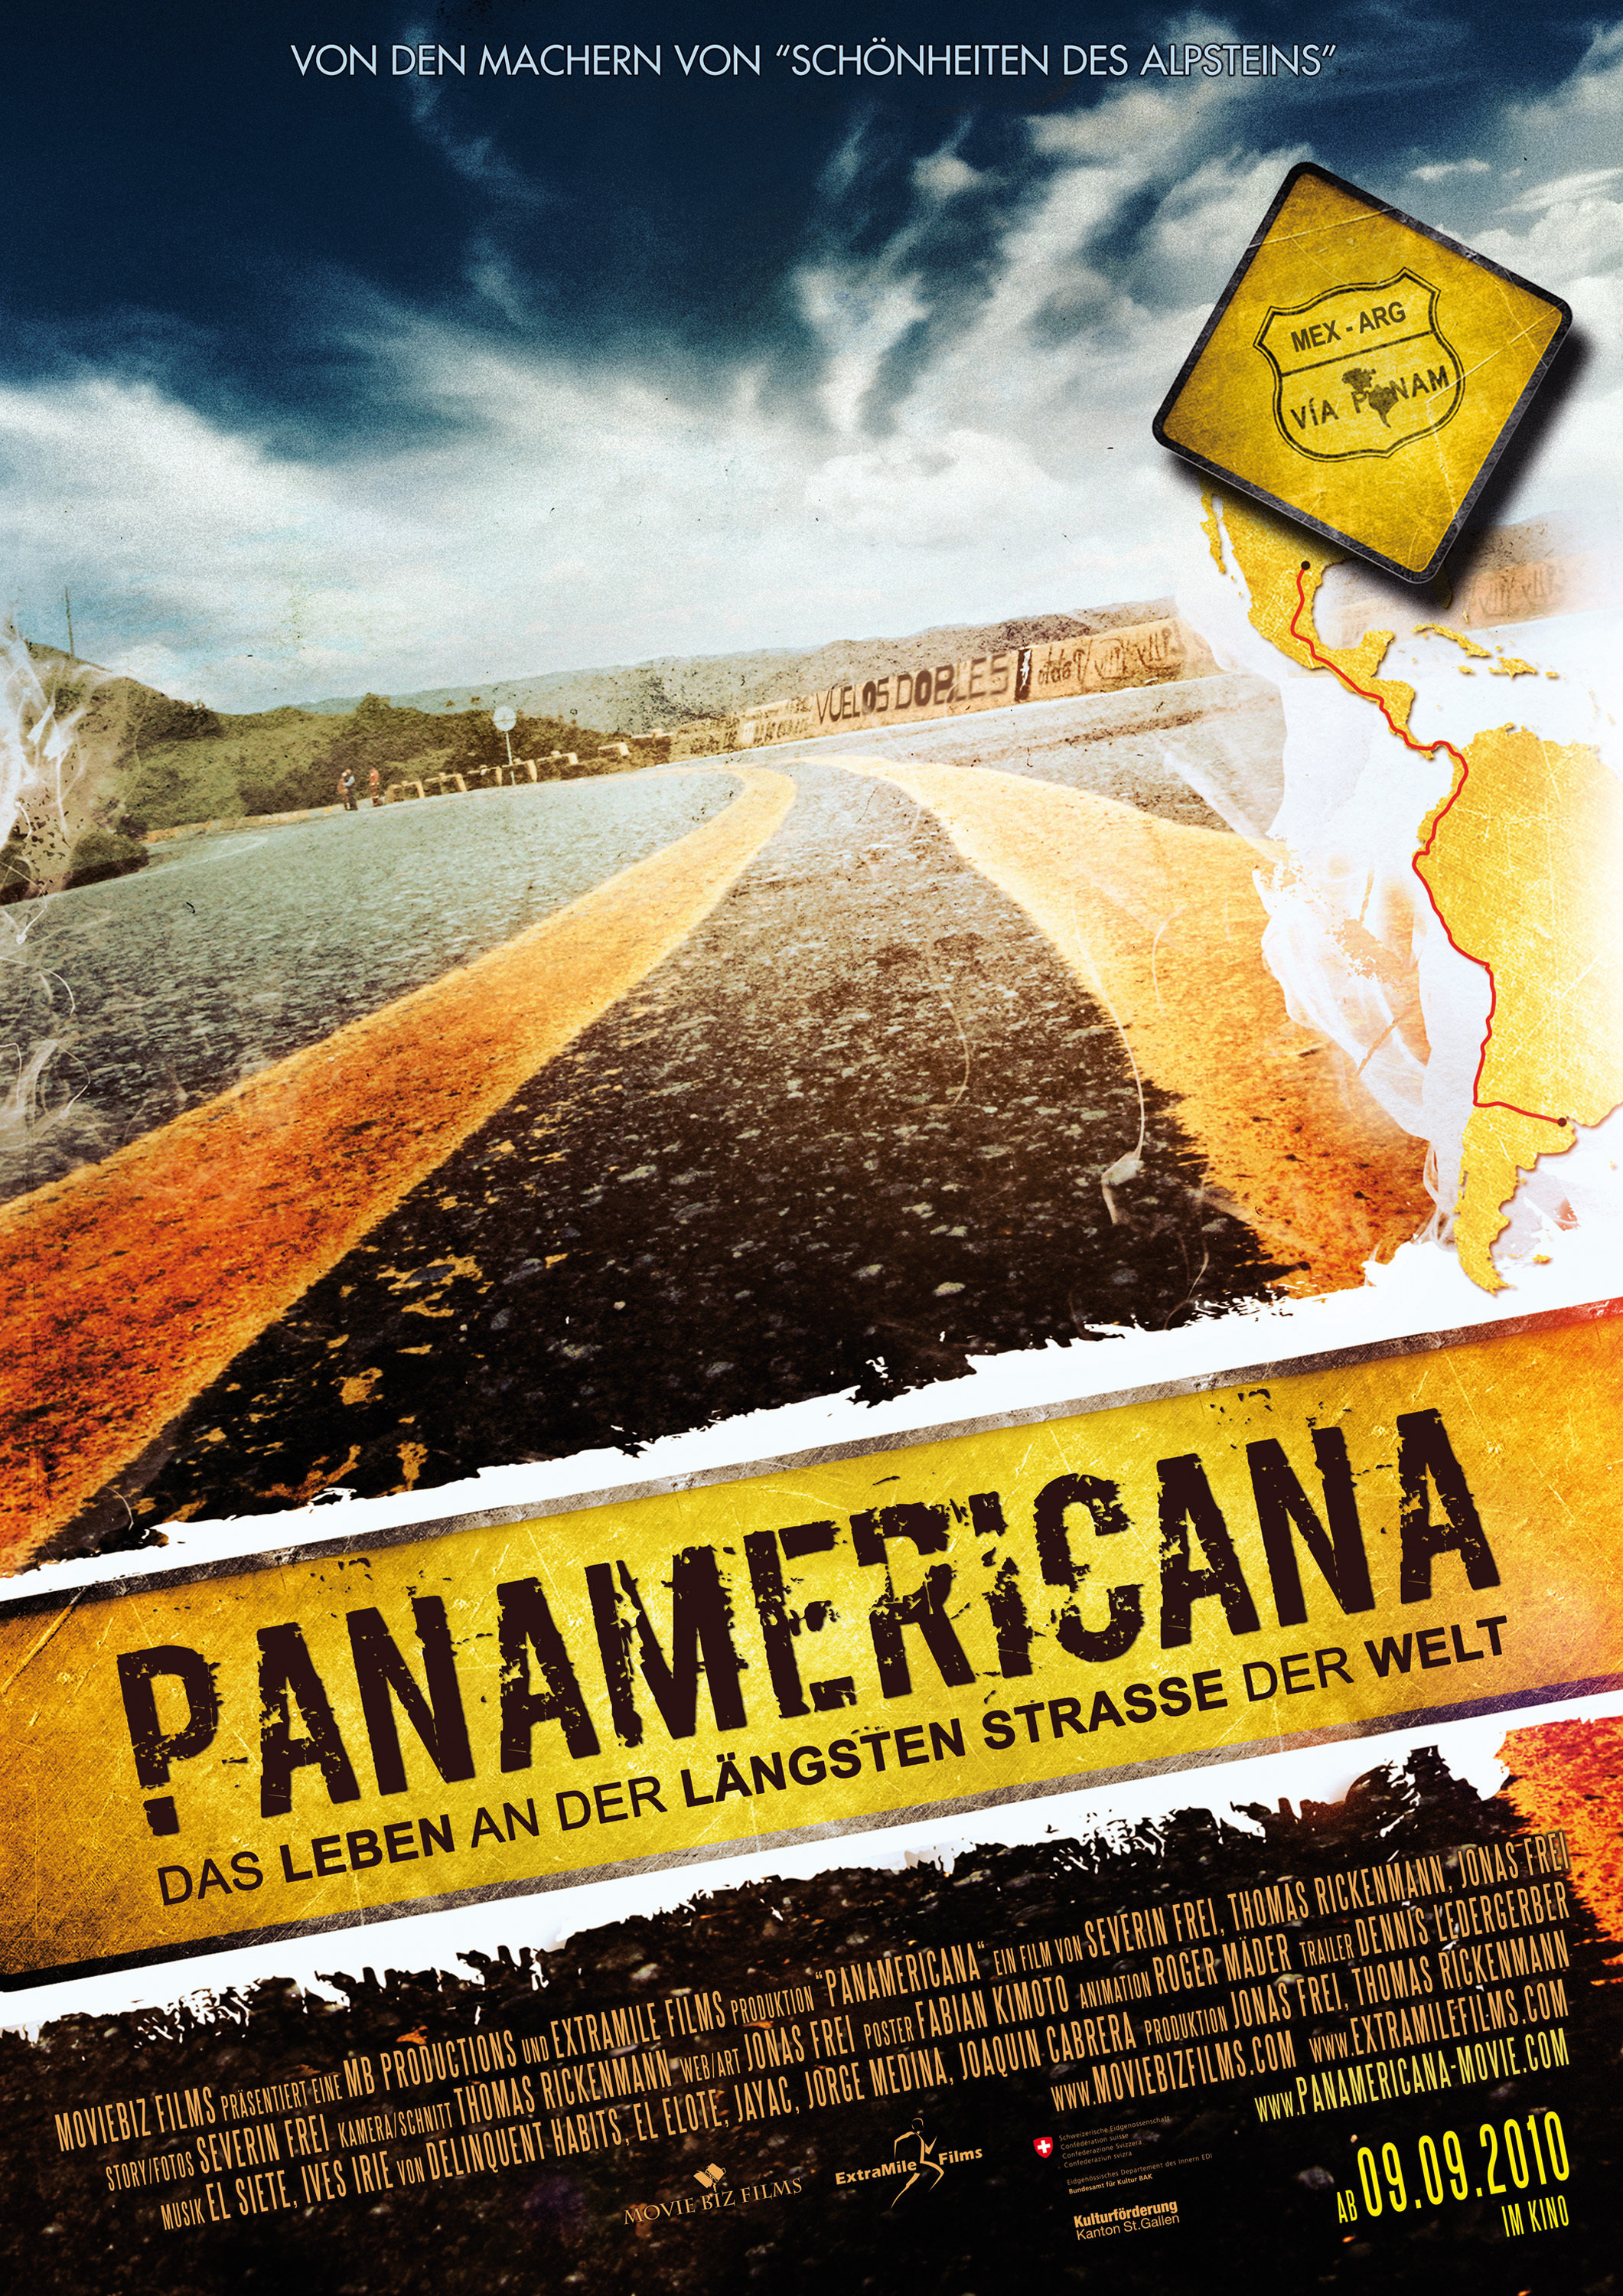 Panamericana - Life at the Longest Road on Earth